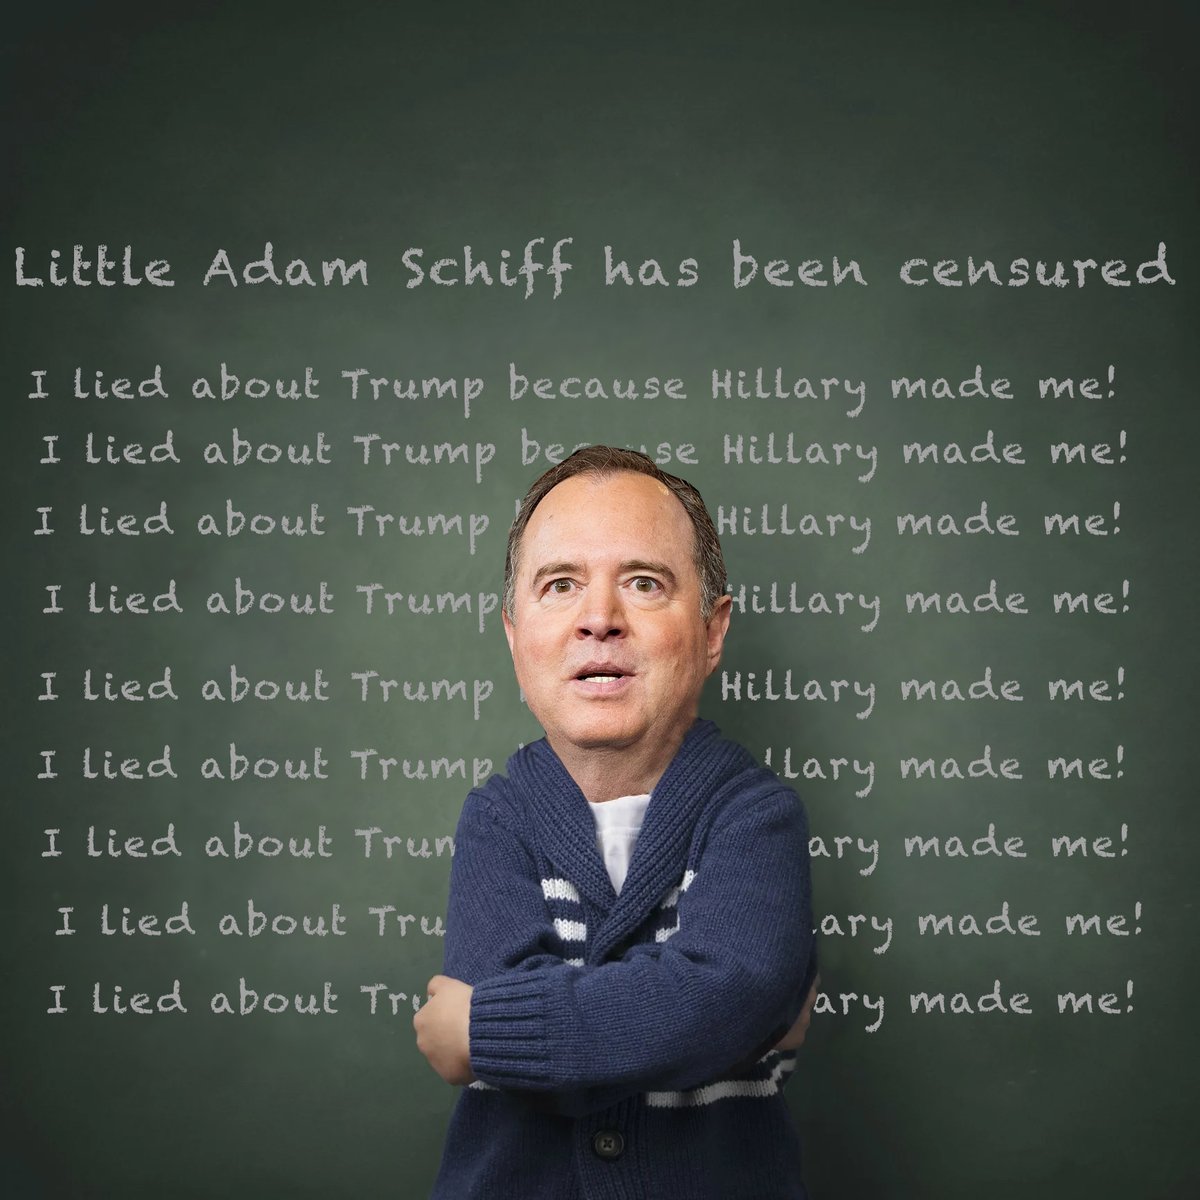 Little Adam Schiff has been censured and will have to stay after school... he needs to be punished...🙄